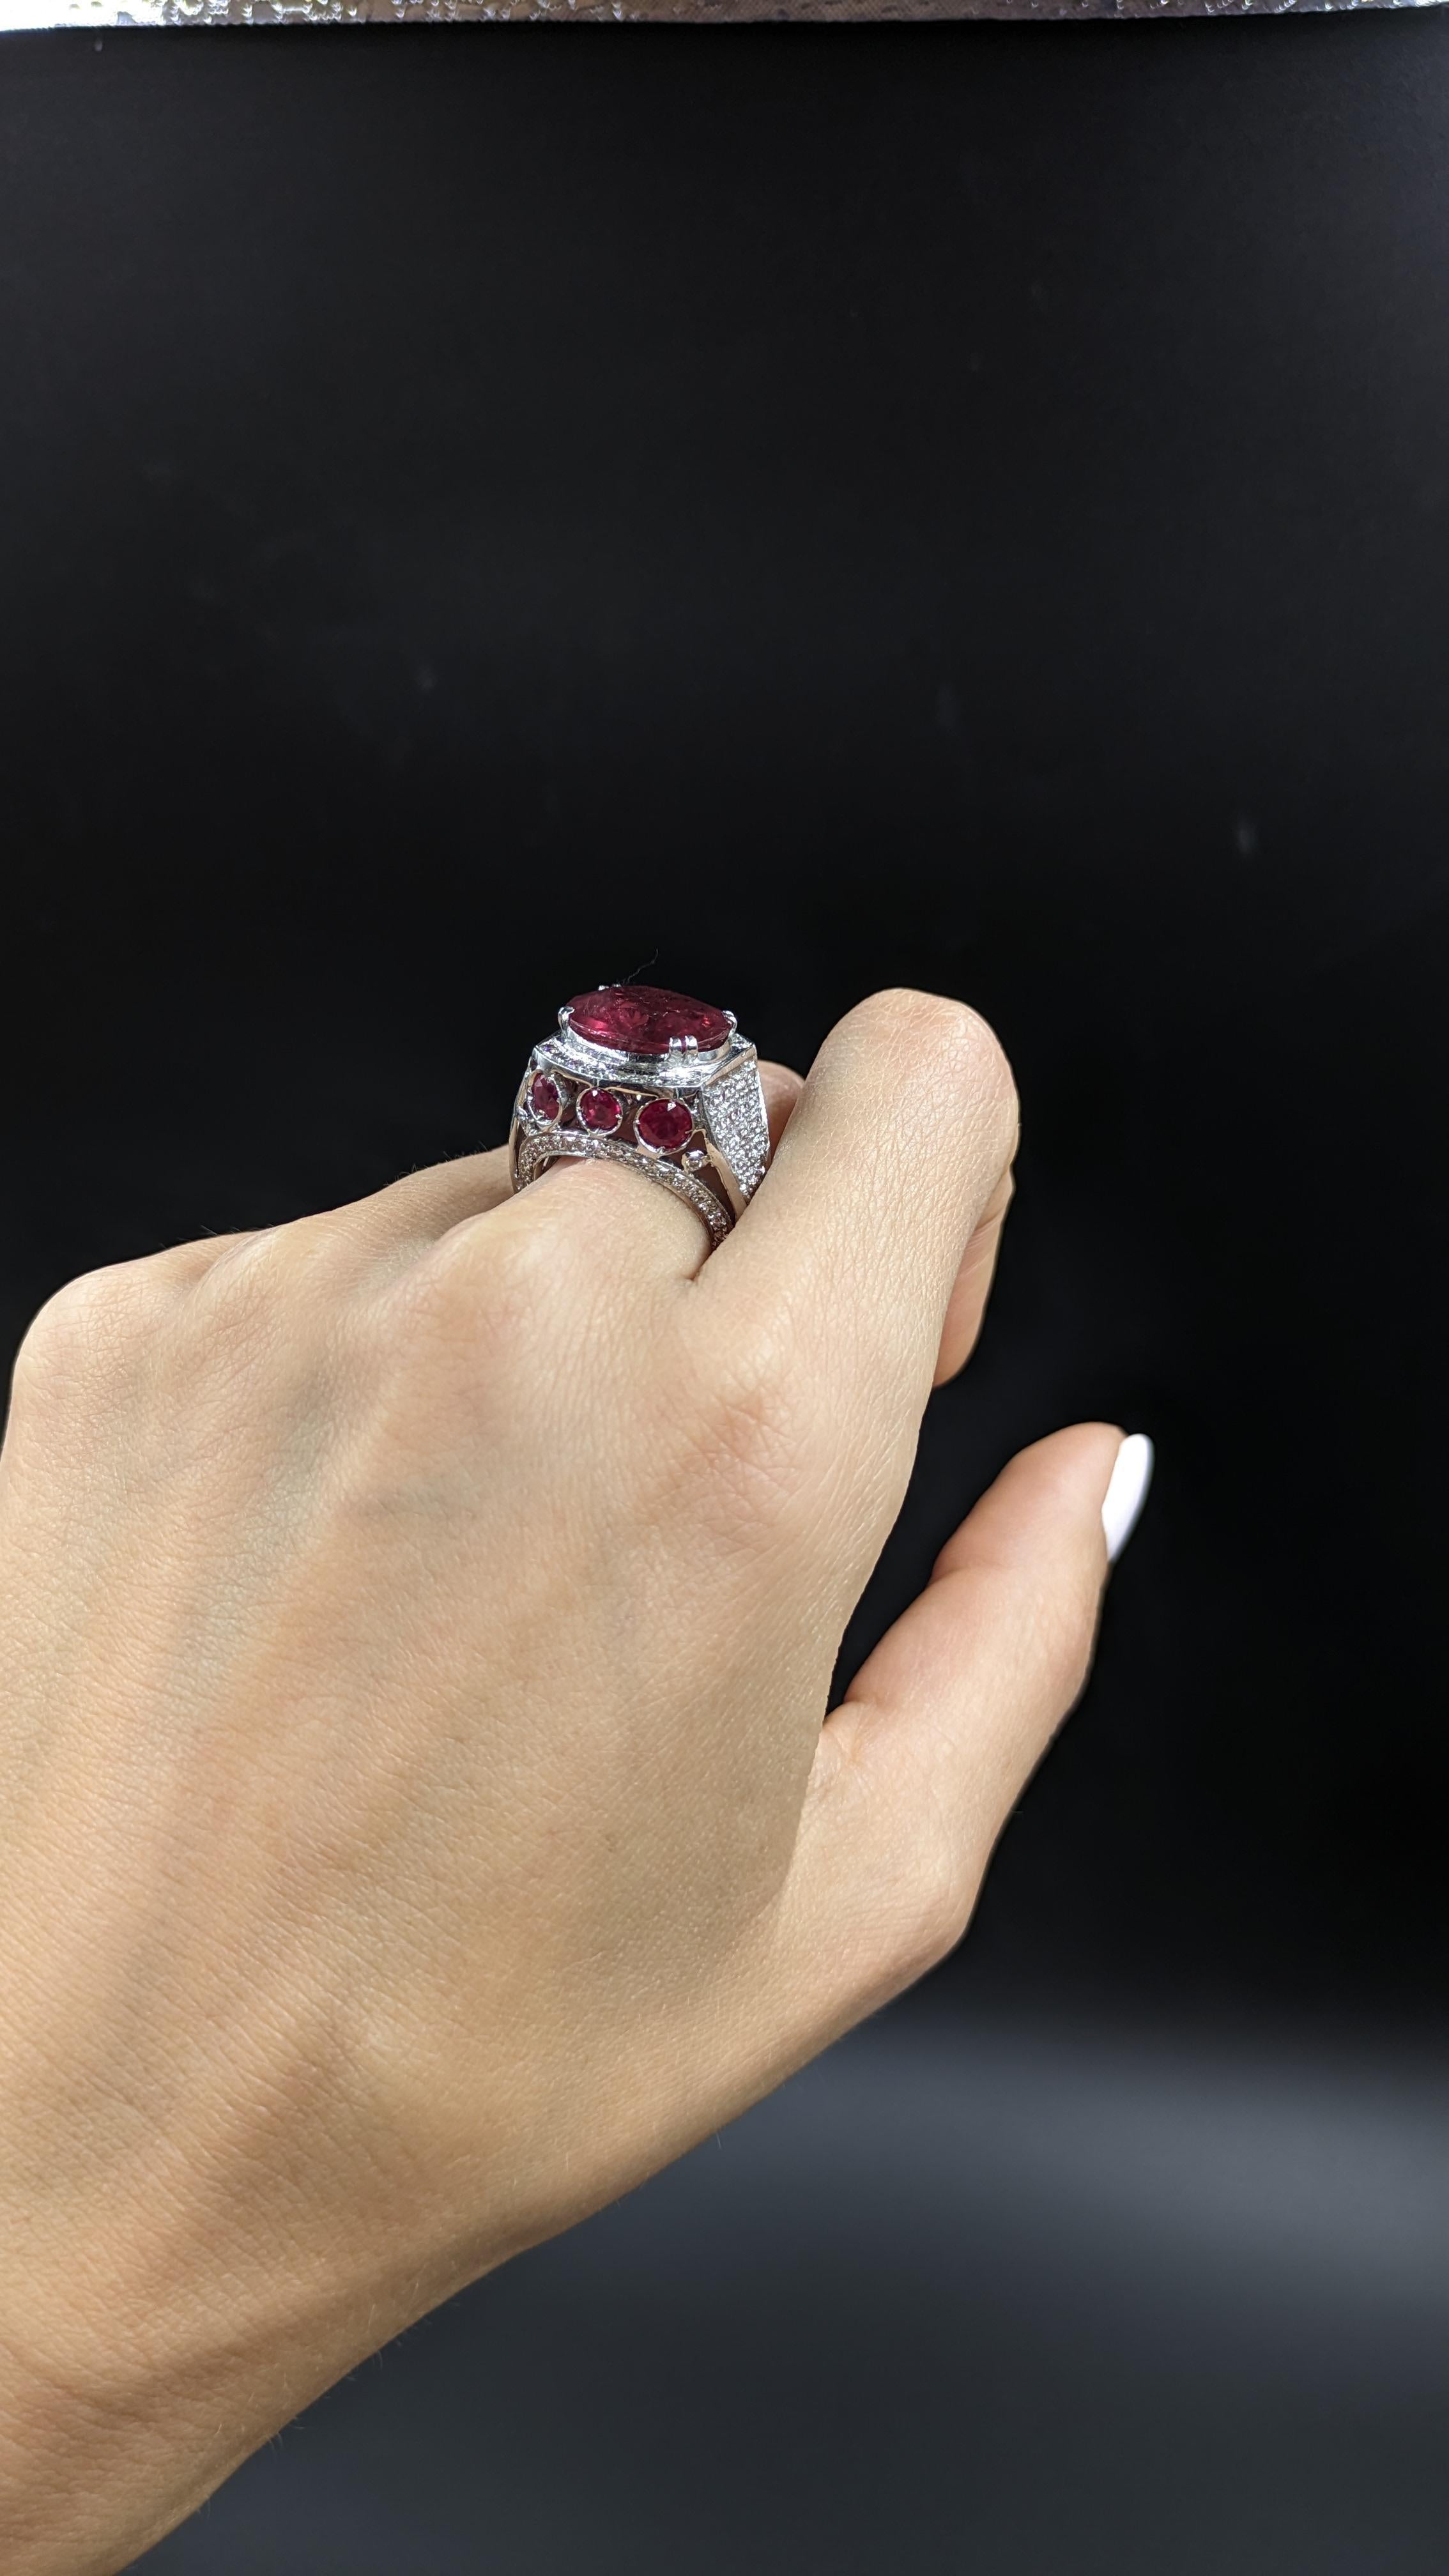 Women's 11 Carat Natural Ruby Ring and 2.3 carat Diamond Cocktail Ring For Sale